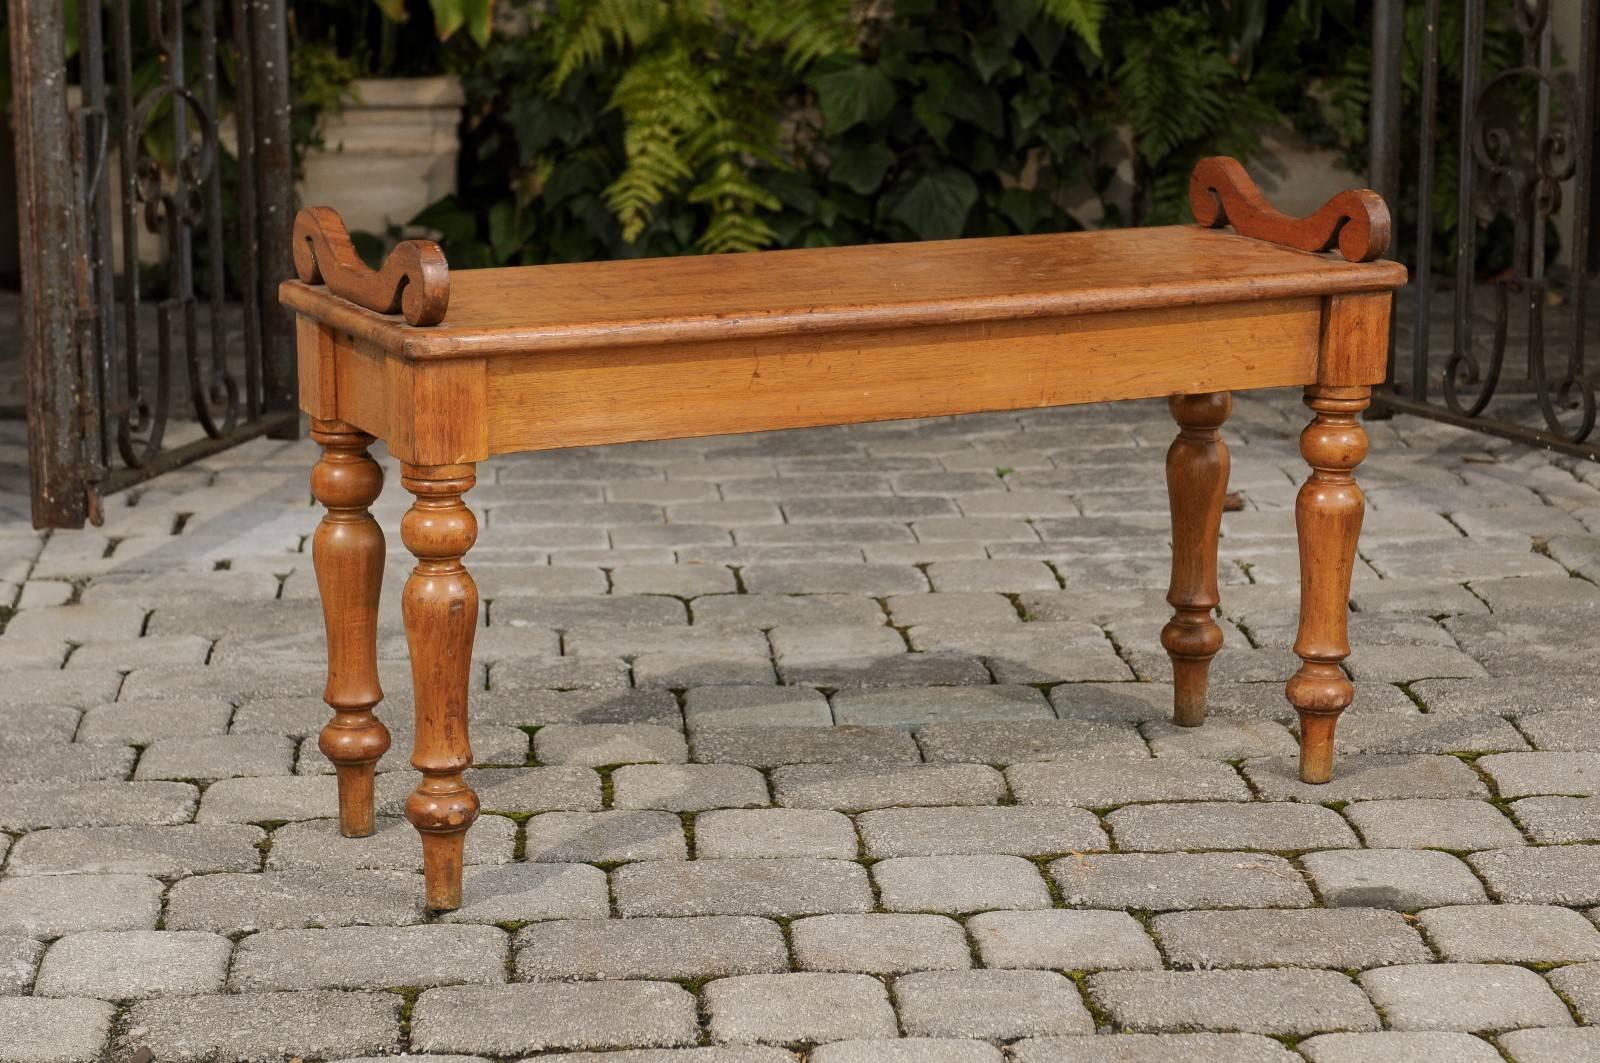 An English oak hall bench with turned legs and curled arm supports from the turn of the century. This English oak hall bench features a rectangular single plank wooden seat with beautiful grain, adorned with two exquisite curled arm supports. The